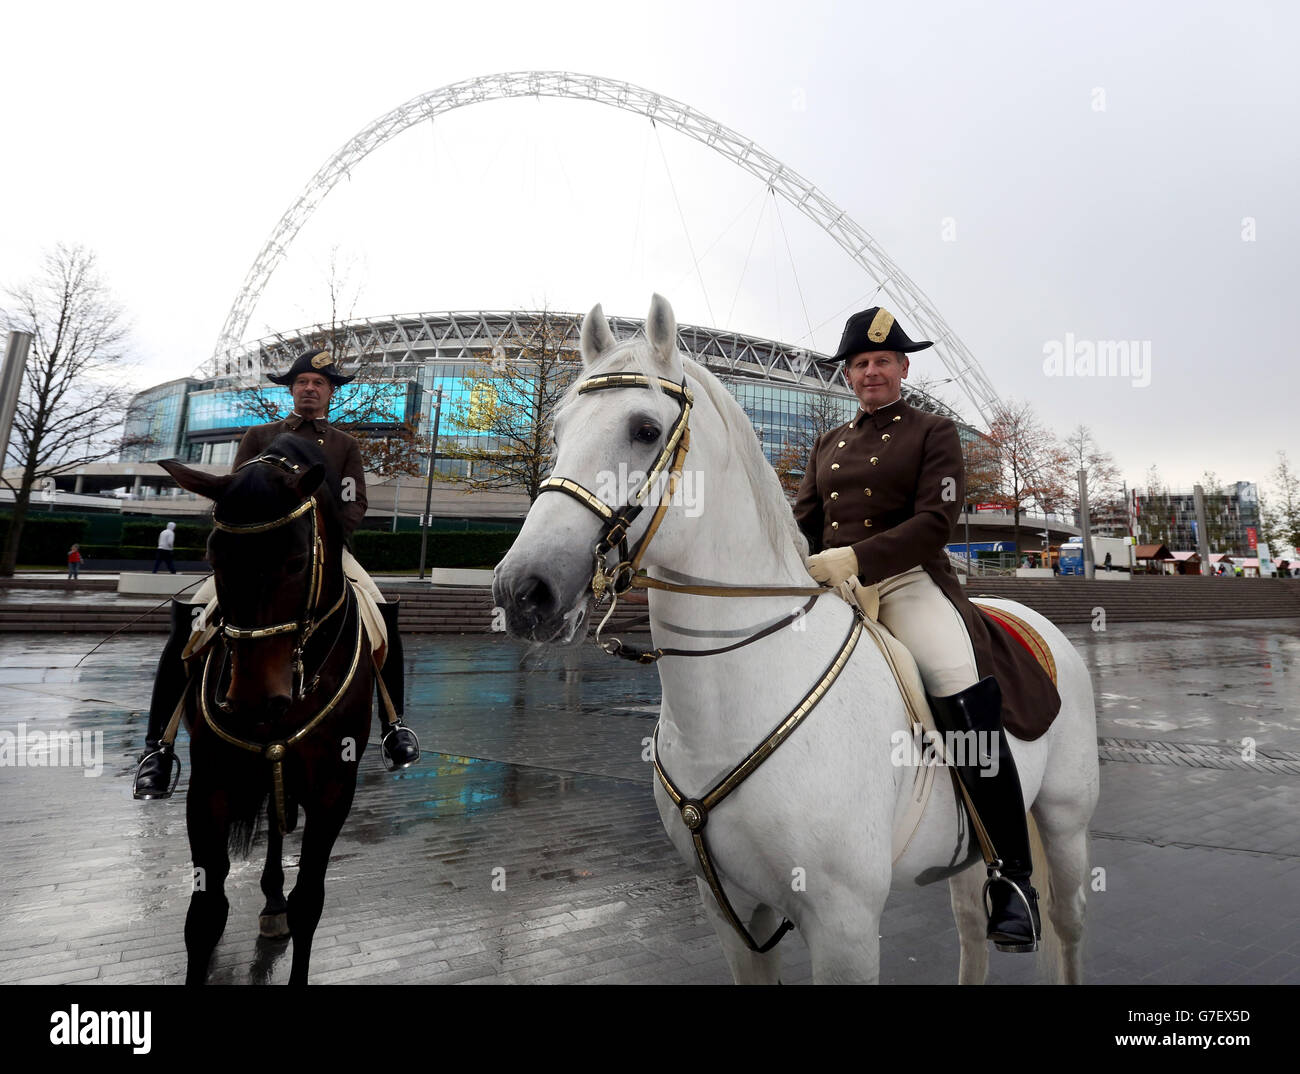 Members of the Spanish Riding School of Vienna Rider Herwig Radnetter (left) riding Pluto Sambata and First Chief Rider Wolfgang Eder with his horse Pluto Malina pose in front of Wembley Stadium in west London where the riding school are performing at Wembley Arena from Friday to Sunday. Stock Photo